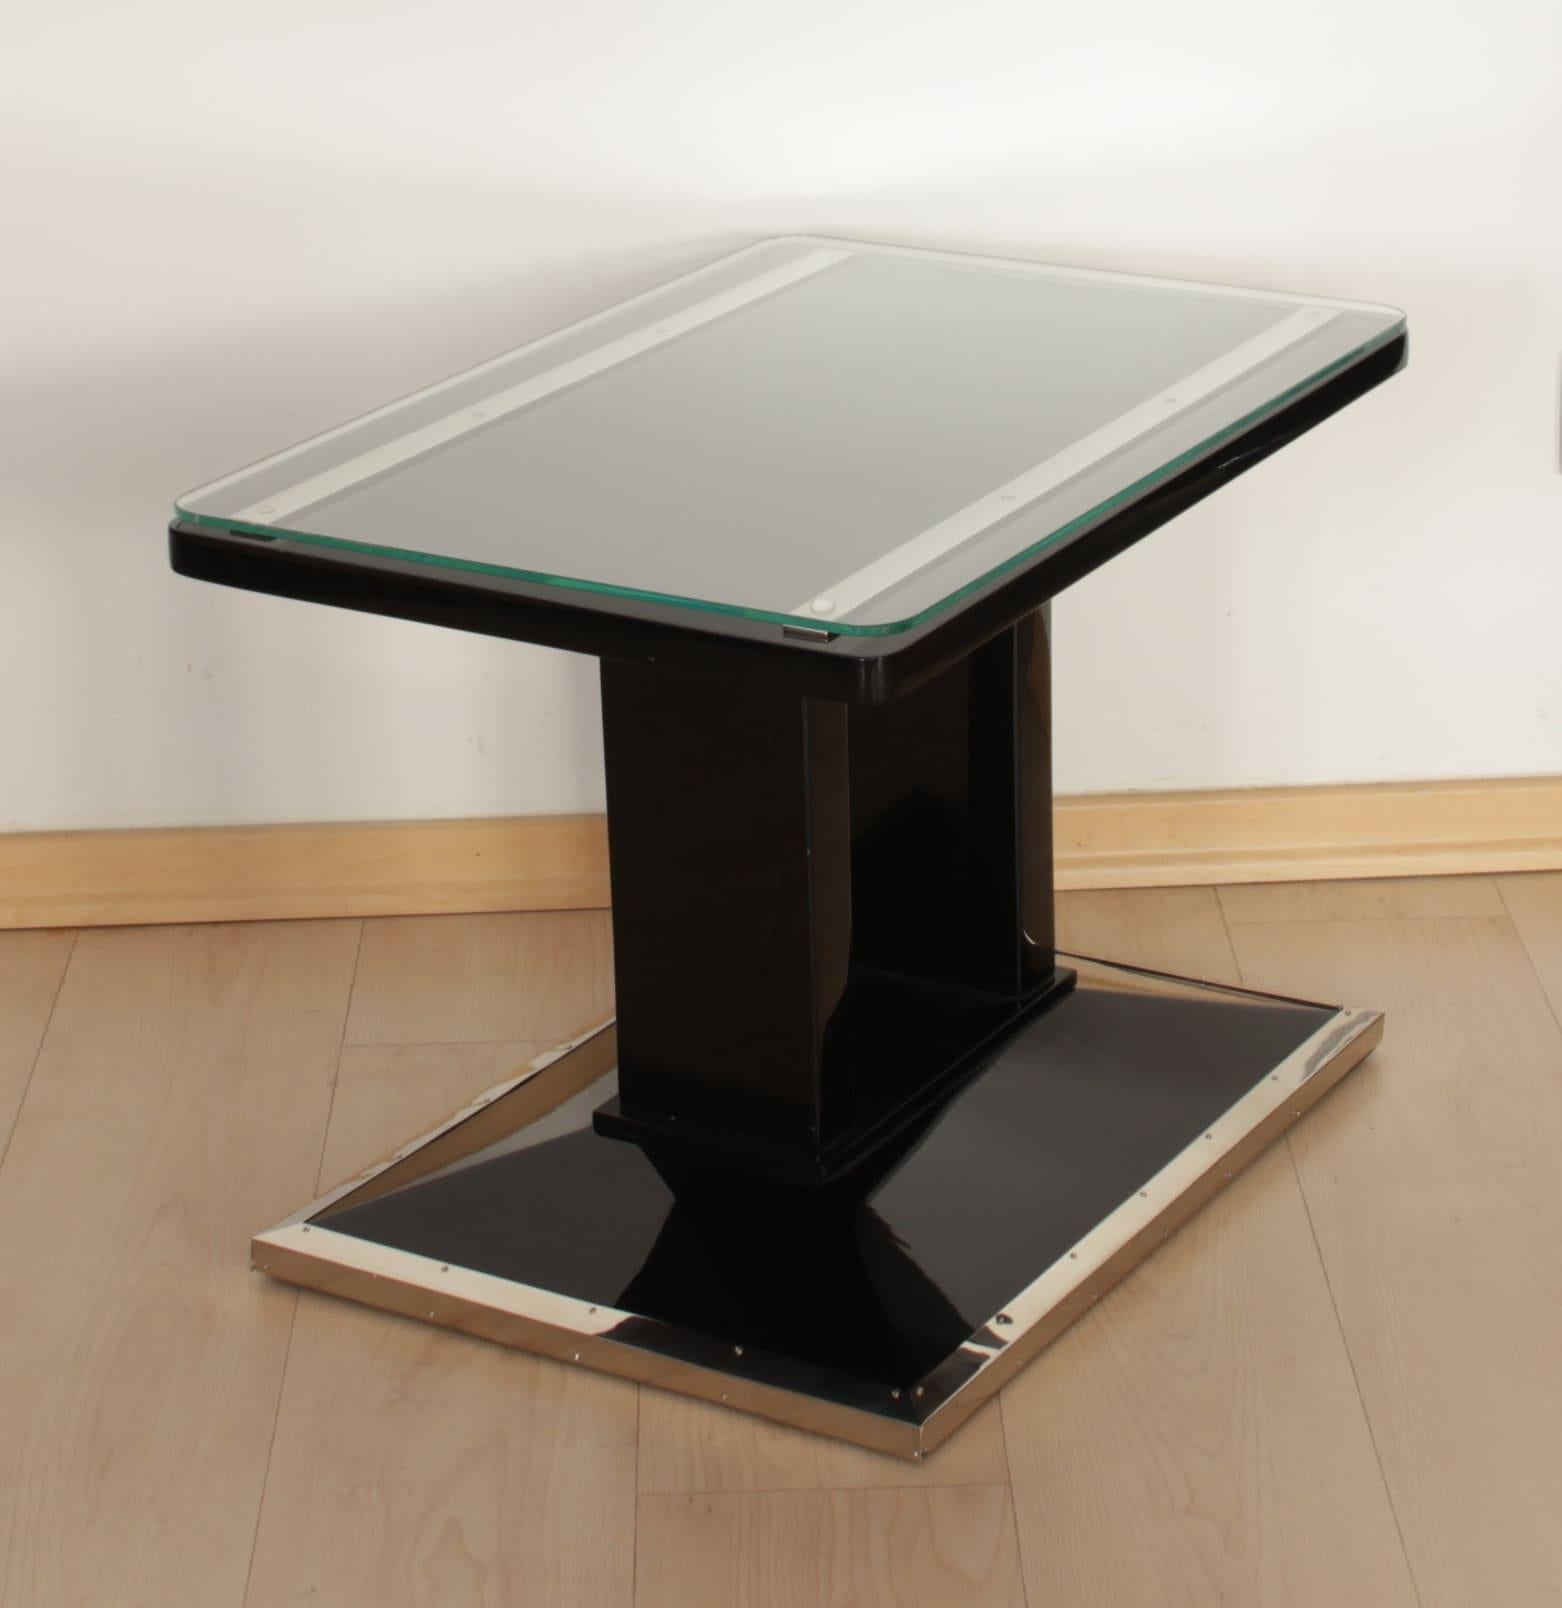 Wonderful, rare and high-qulaity restored side table / former luggage table. 
The table was used as a luggage table in the 1920/30s with steel trims at the top for placing a suitcase. We fully restored it with a new black lacquer and glass plate on